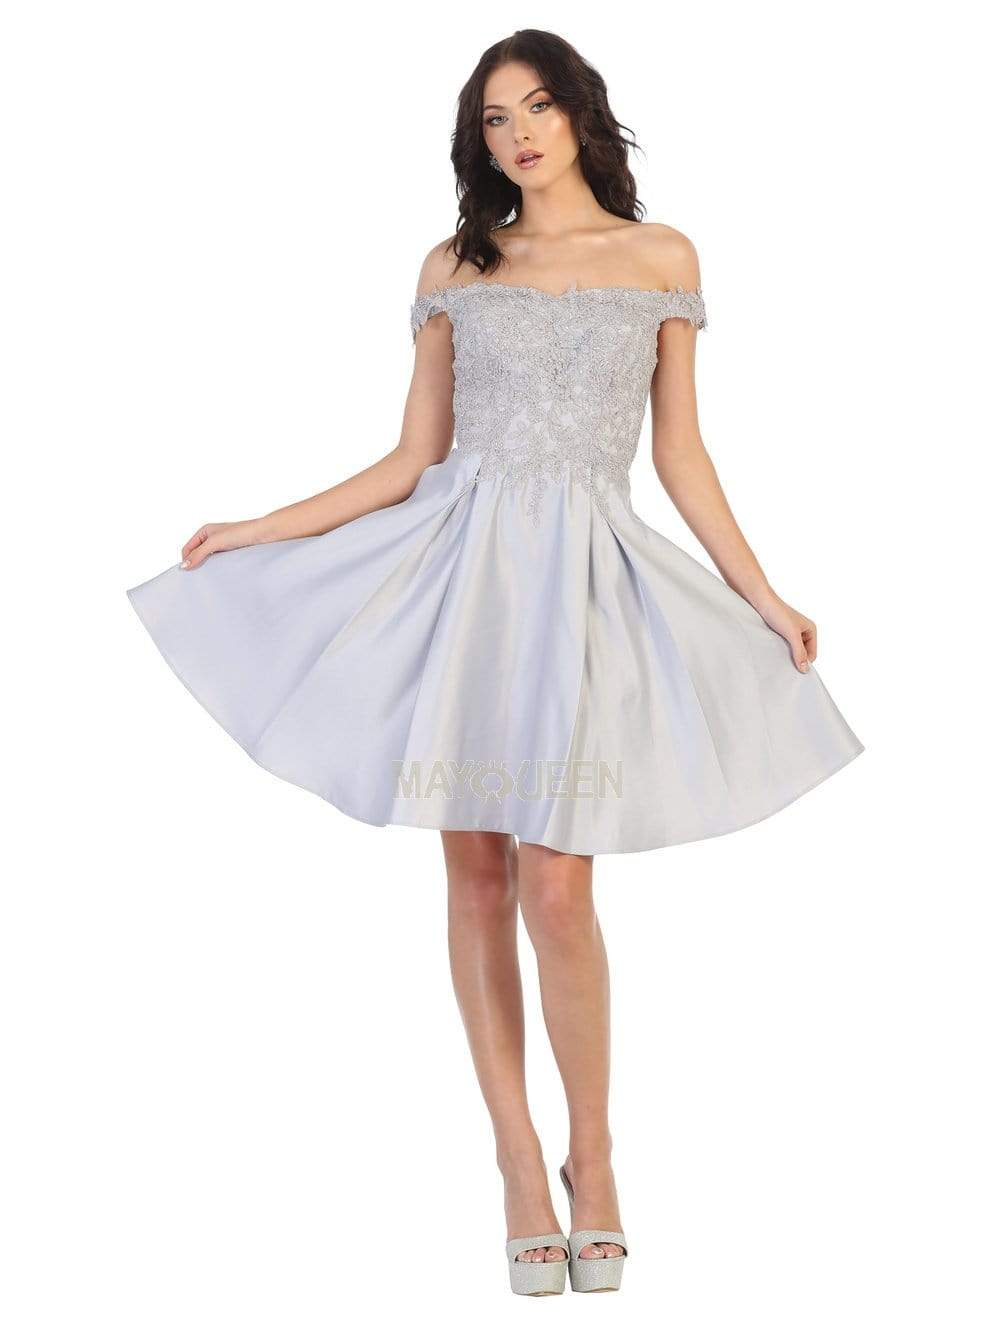 May Queen - MQ1766 Off Shoulder Beaded Lace Satin Cocktail Dress Homecoming Dresses 2 / Silver